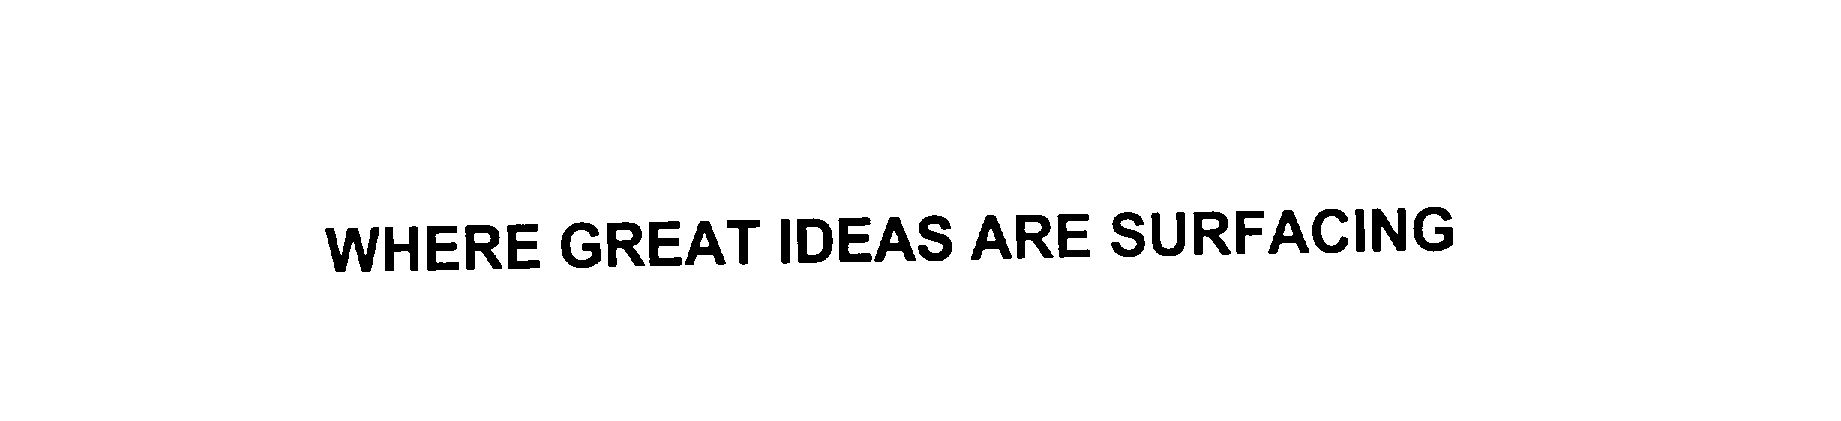  WHERE GREAT IDEAS ARE SURFACING